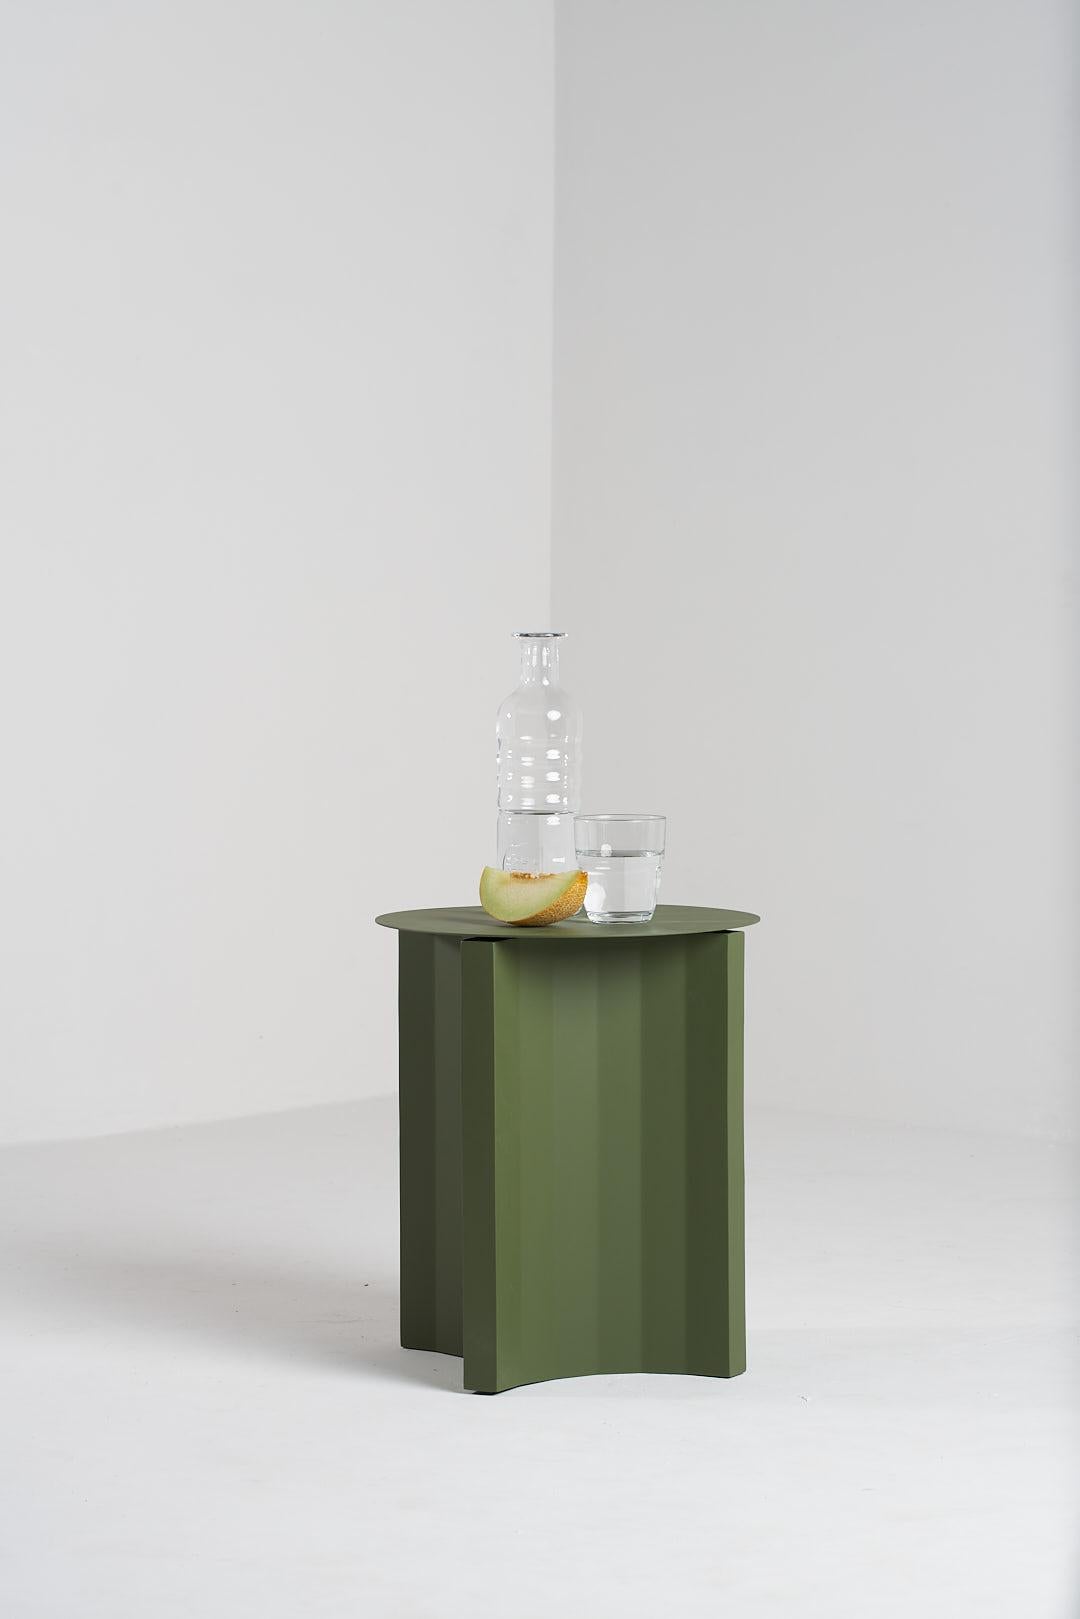 Pampulha Collection, Military Green Steel Side Tables (Set of 2) In New Condition For Sale In Santa Edwiges, MG